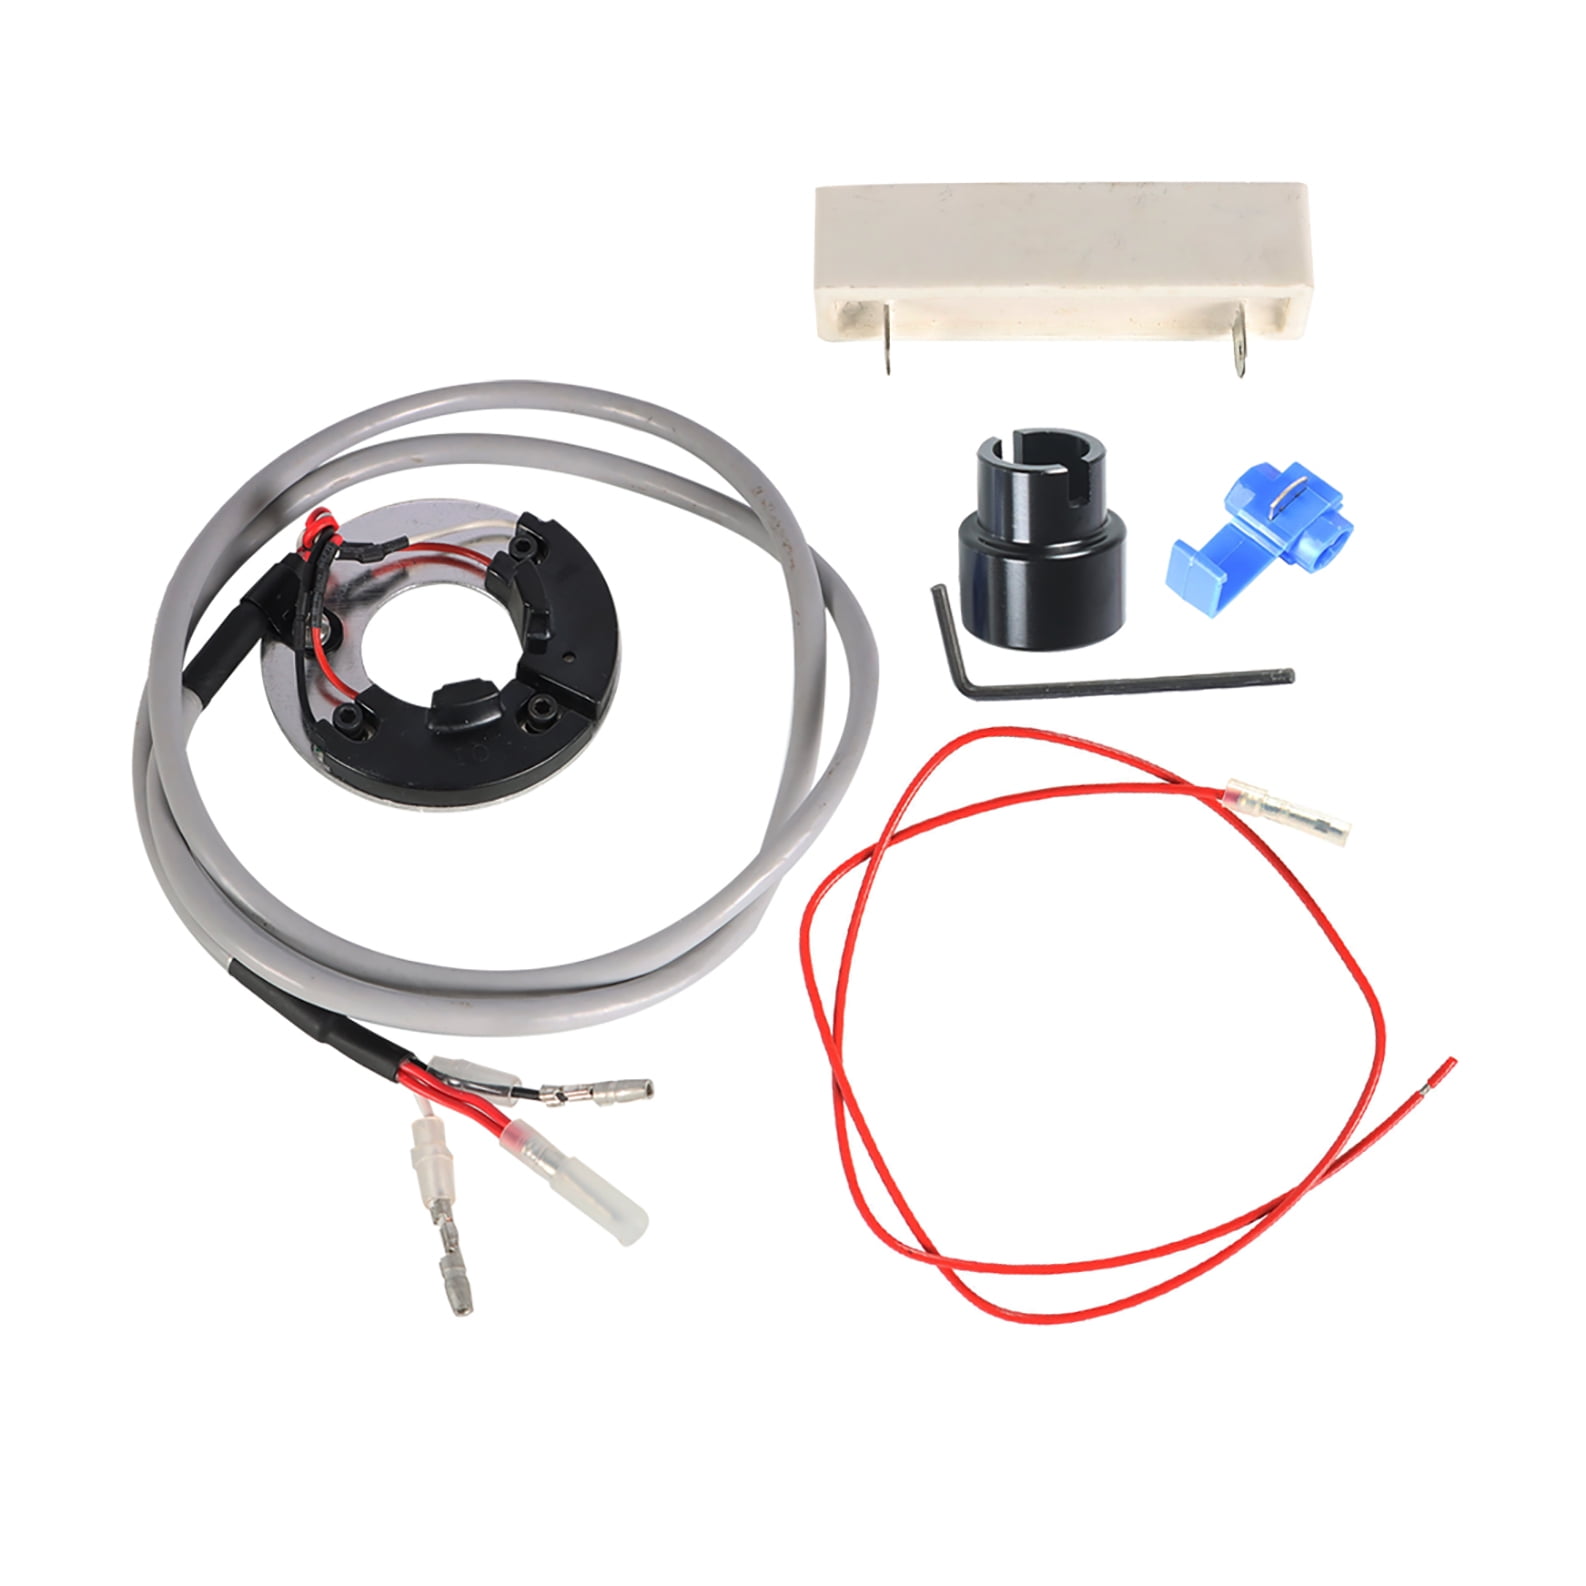 Electronic Ignition System DS1-3 Fit for Honda GL1000 Goldwing 1975-1979 